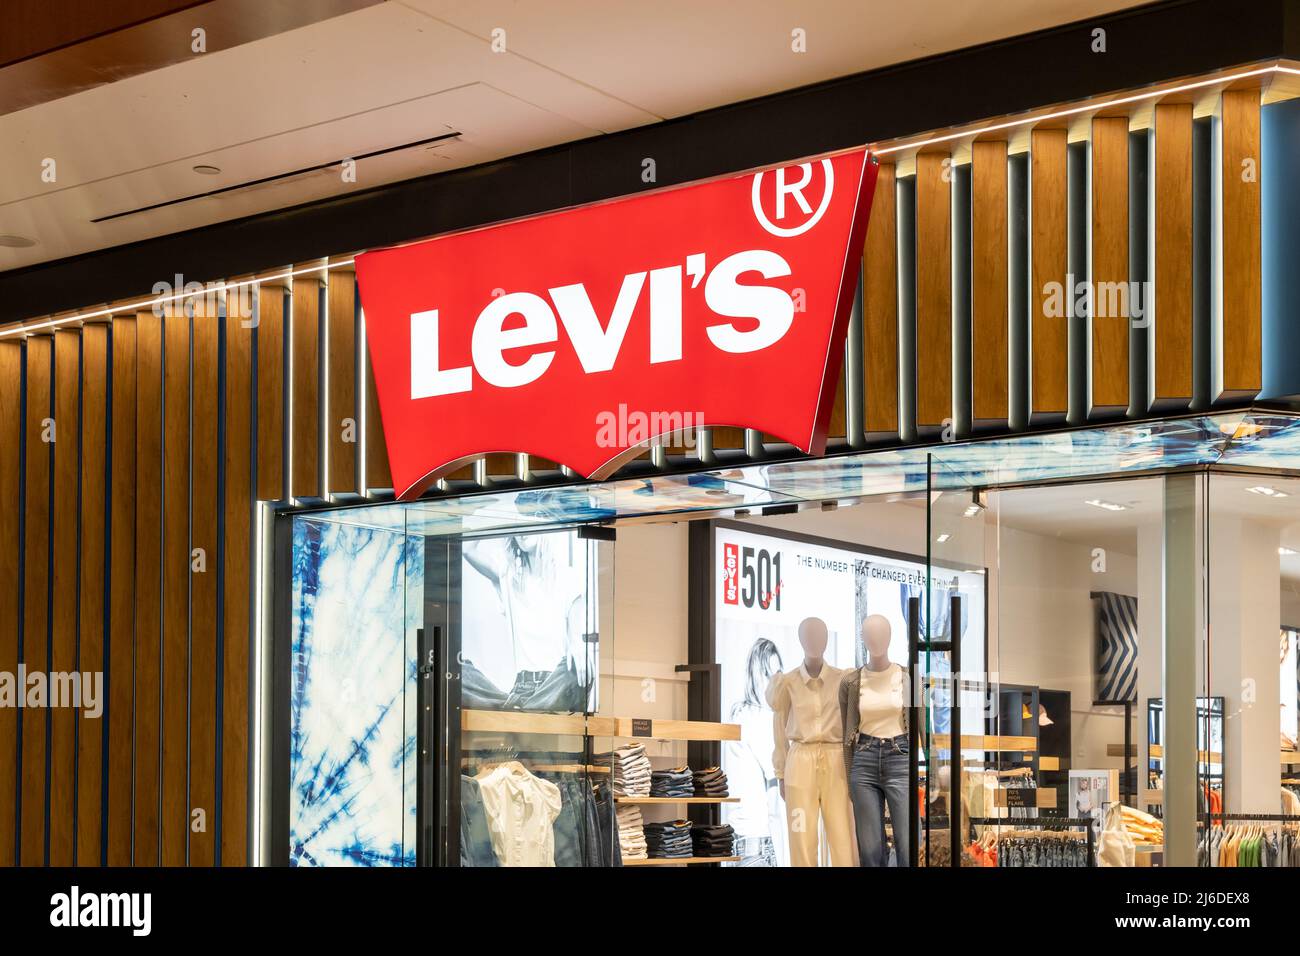 Levis store stock images - Alamy